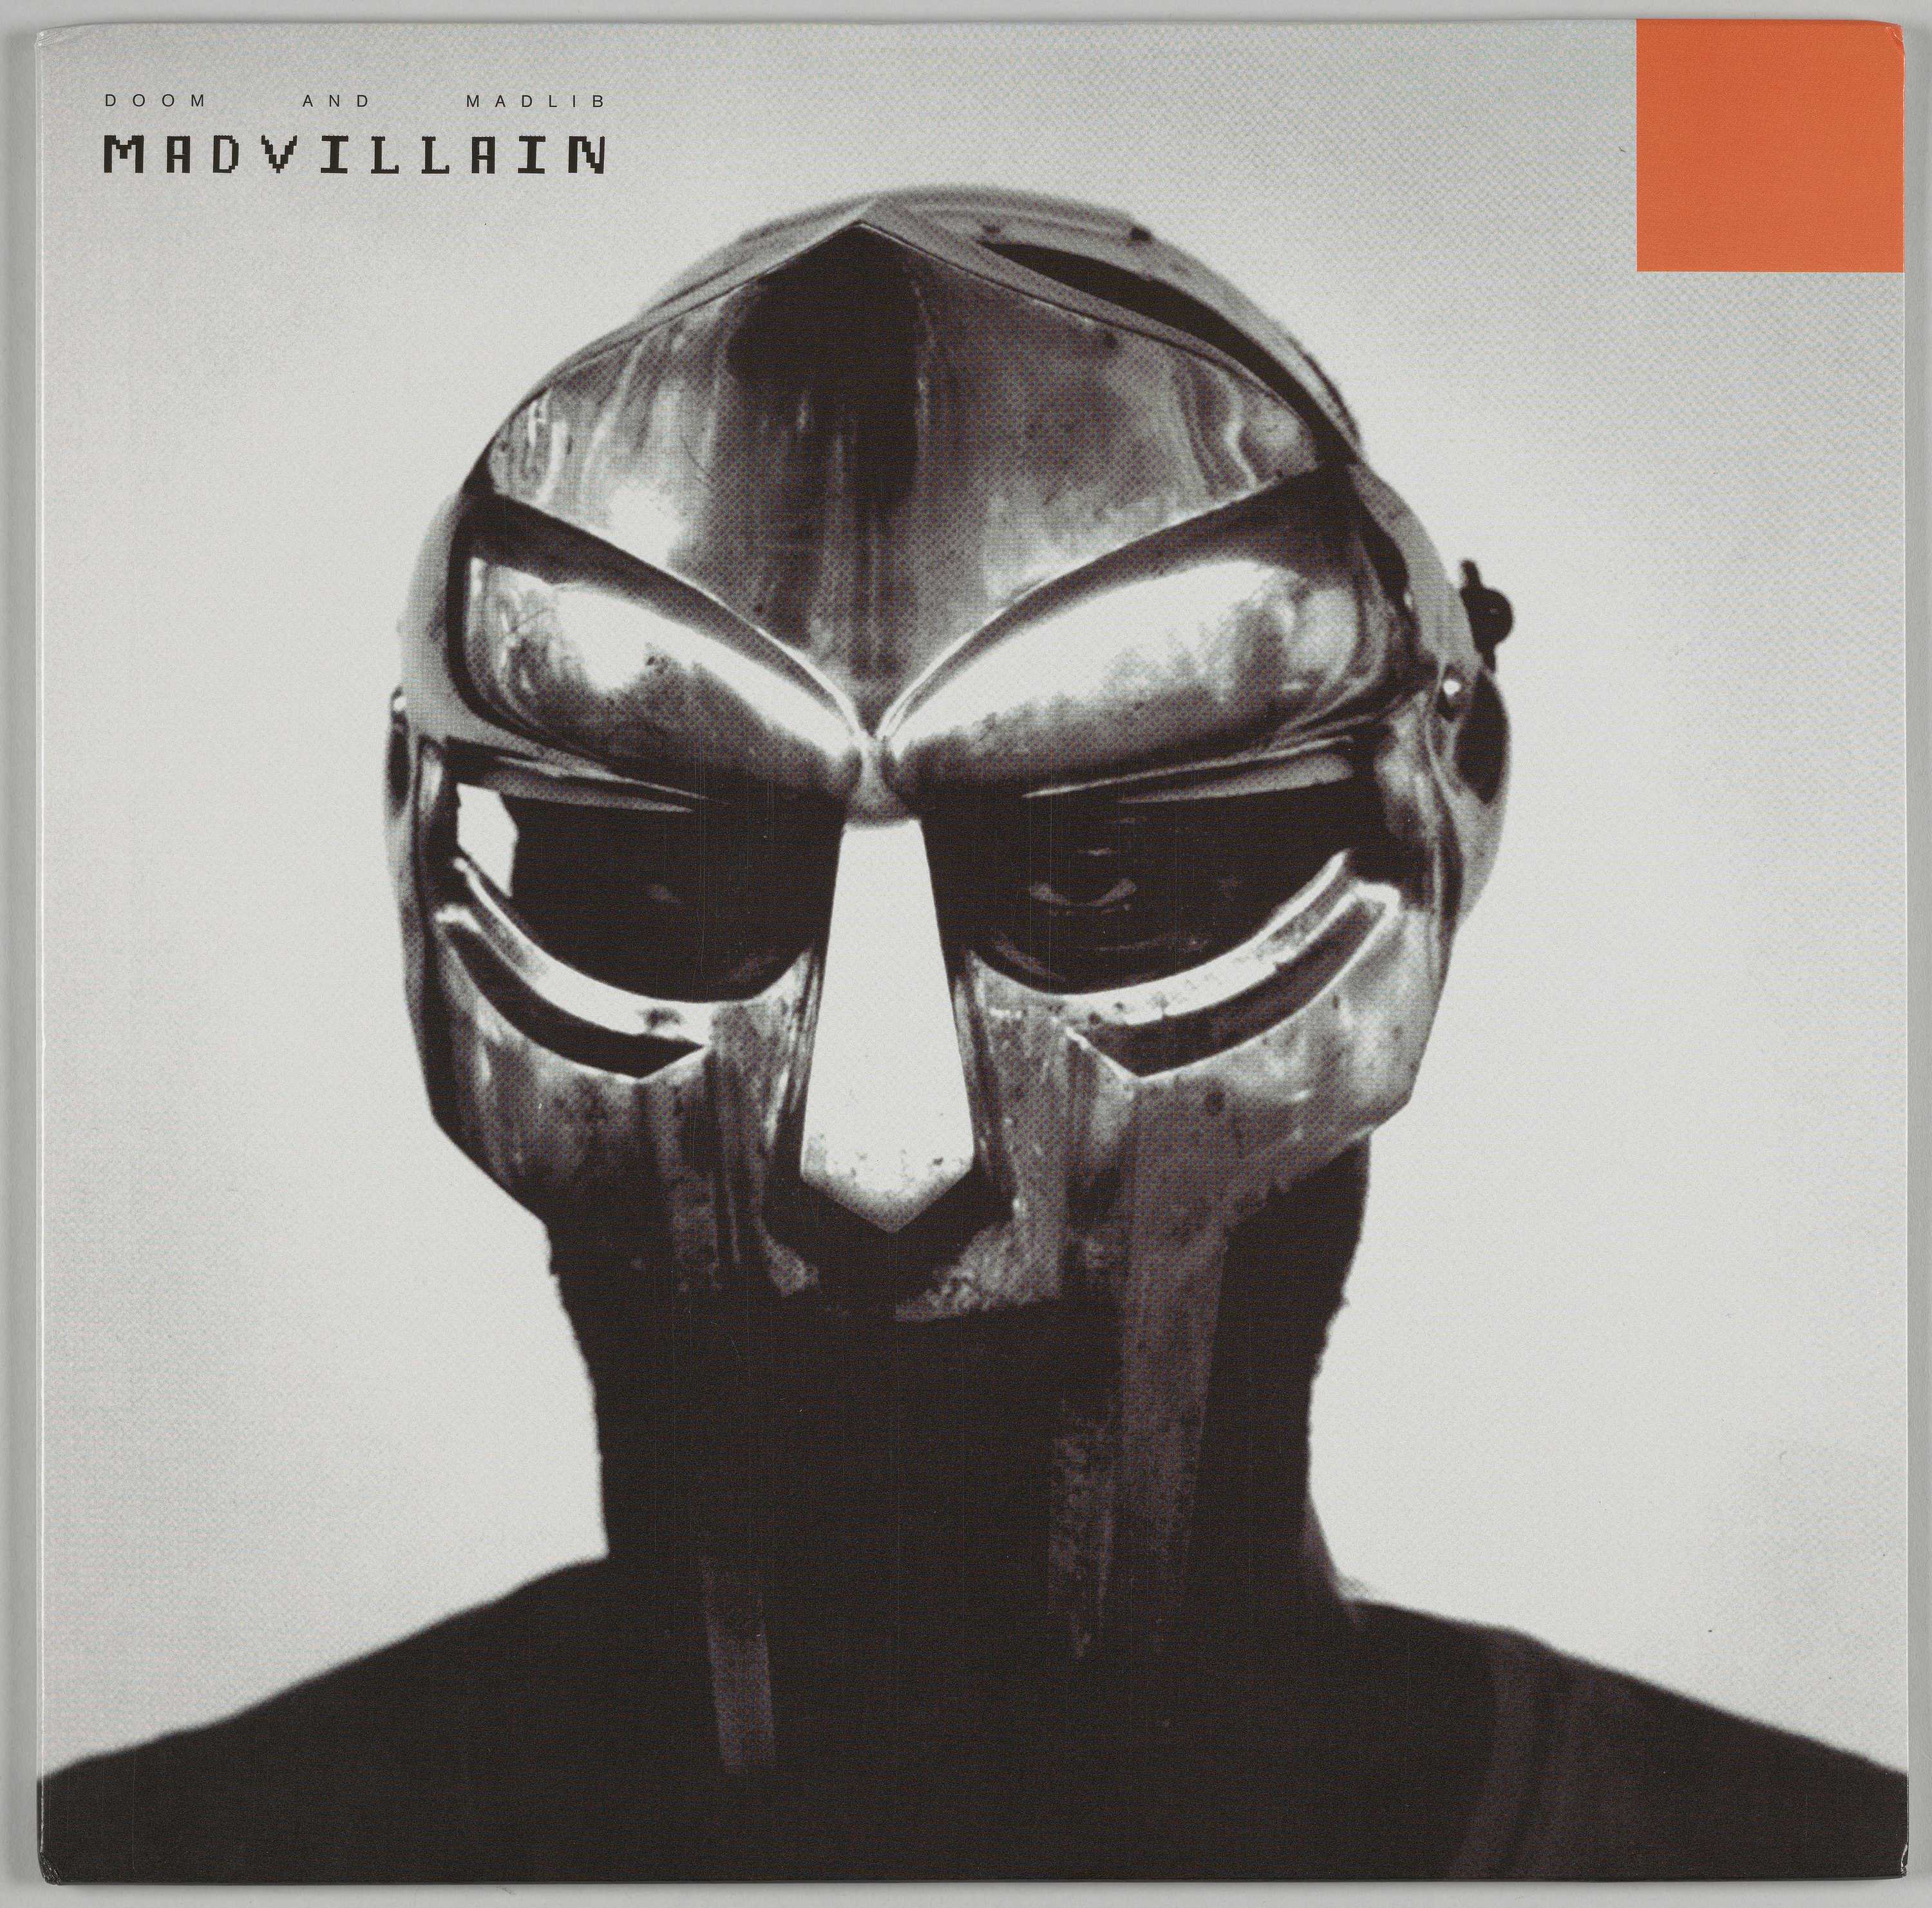 Madvilliany's cover is a black and white photo with Madvillian in a metal helmet that cover his face, except for his eyes.